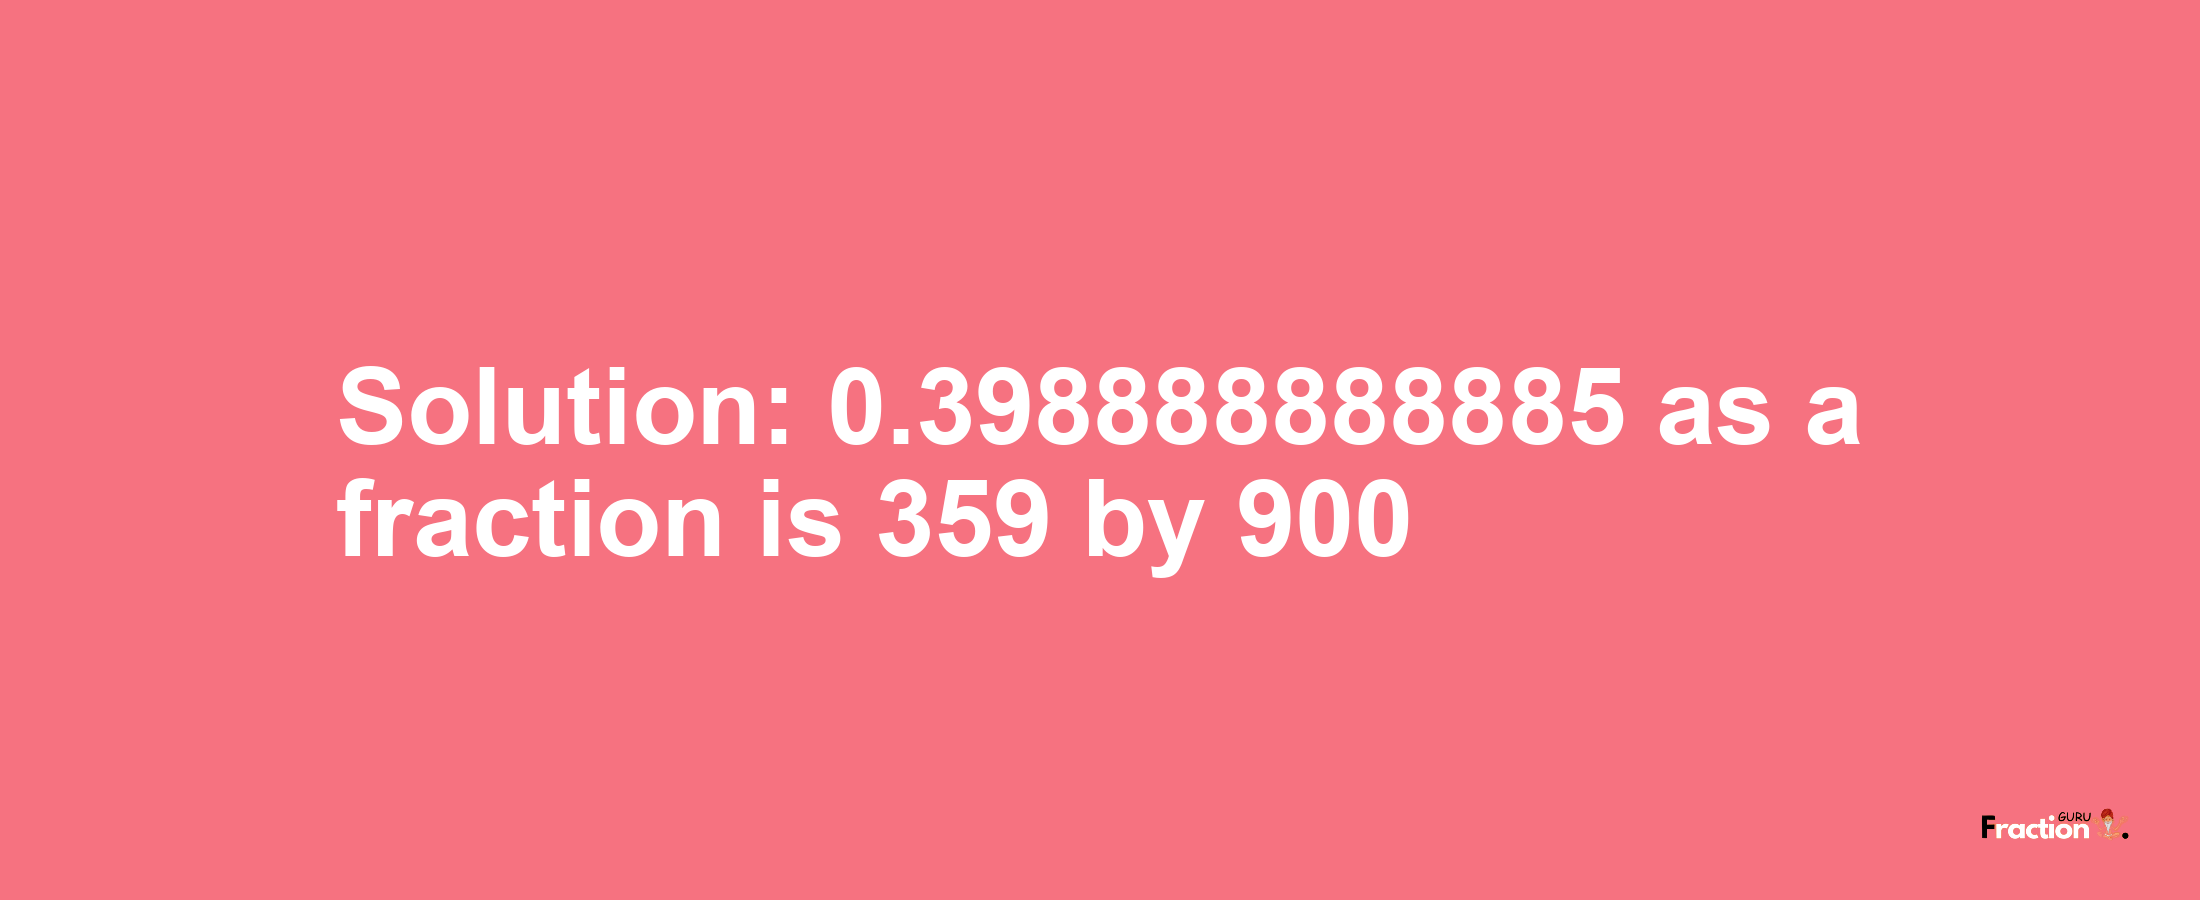 Solution:0.398888888885 as a fraction is 359/900